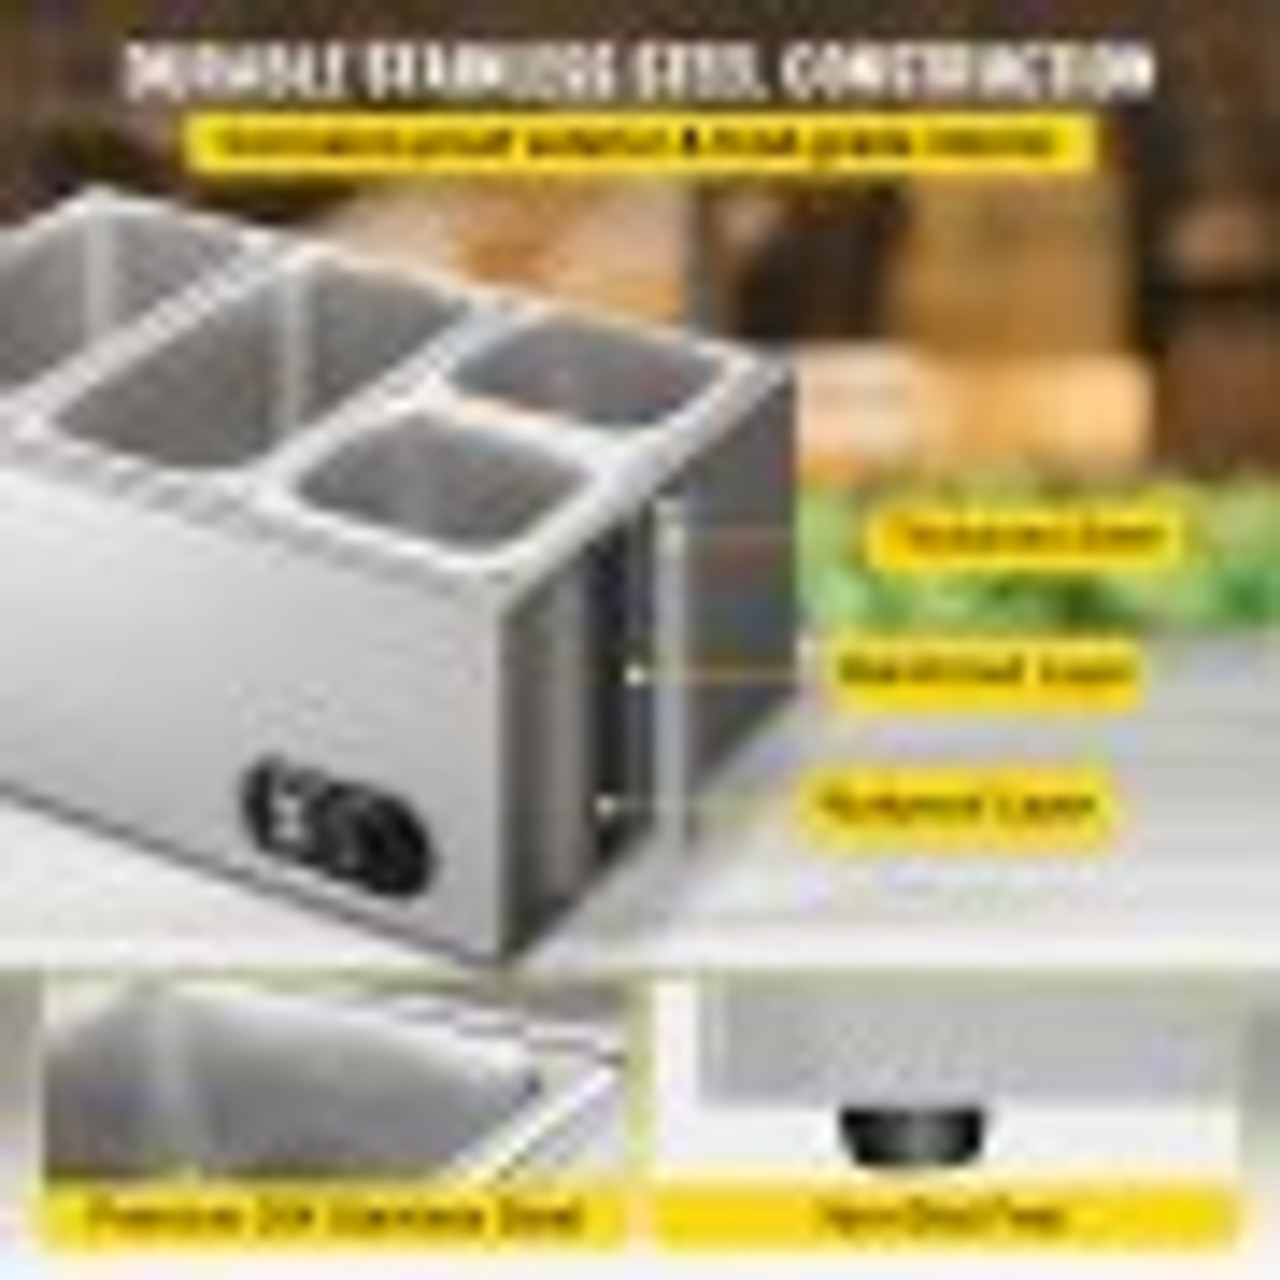 110V Commercial Food Warmer 2x1/3GN and 2x1/6GN, 4-Pan Stainless Steel Bain Marie 14.8 Qt Capacity, 1500W Steam Table 15cm/6inch Deep,Temp. Control 86-185, Electric Soup Warmer w/Lids & 2 Ladles